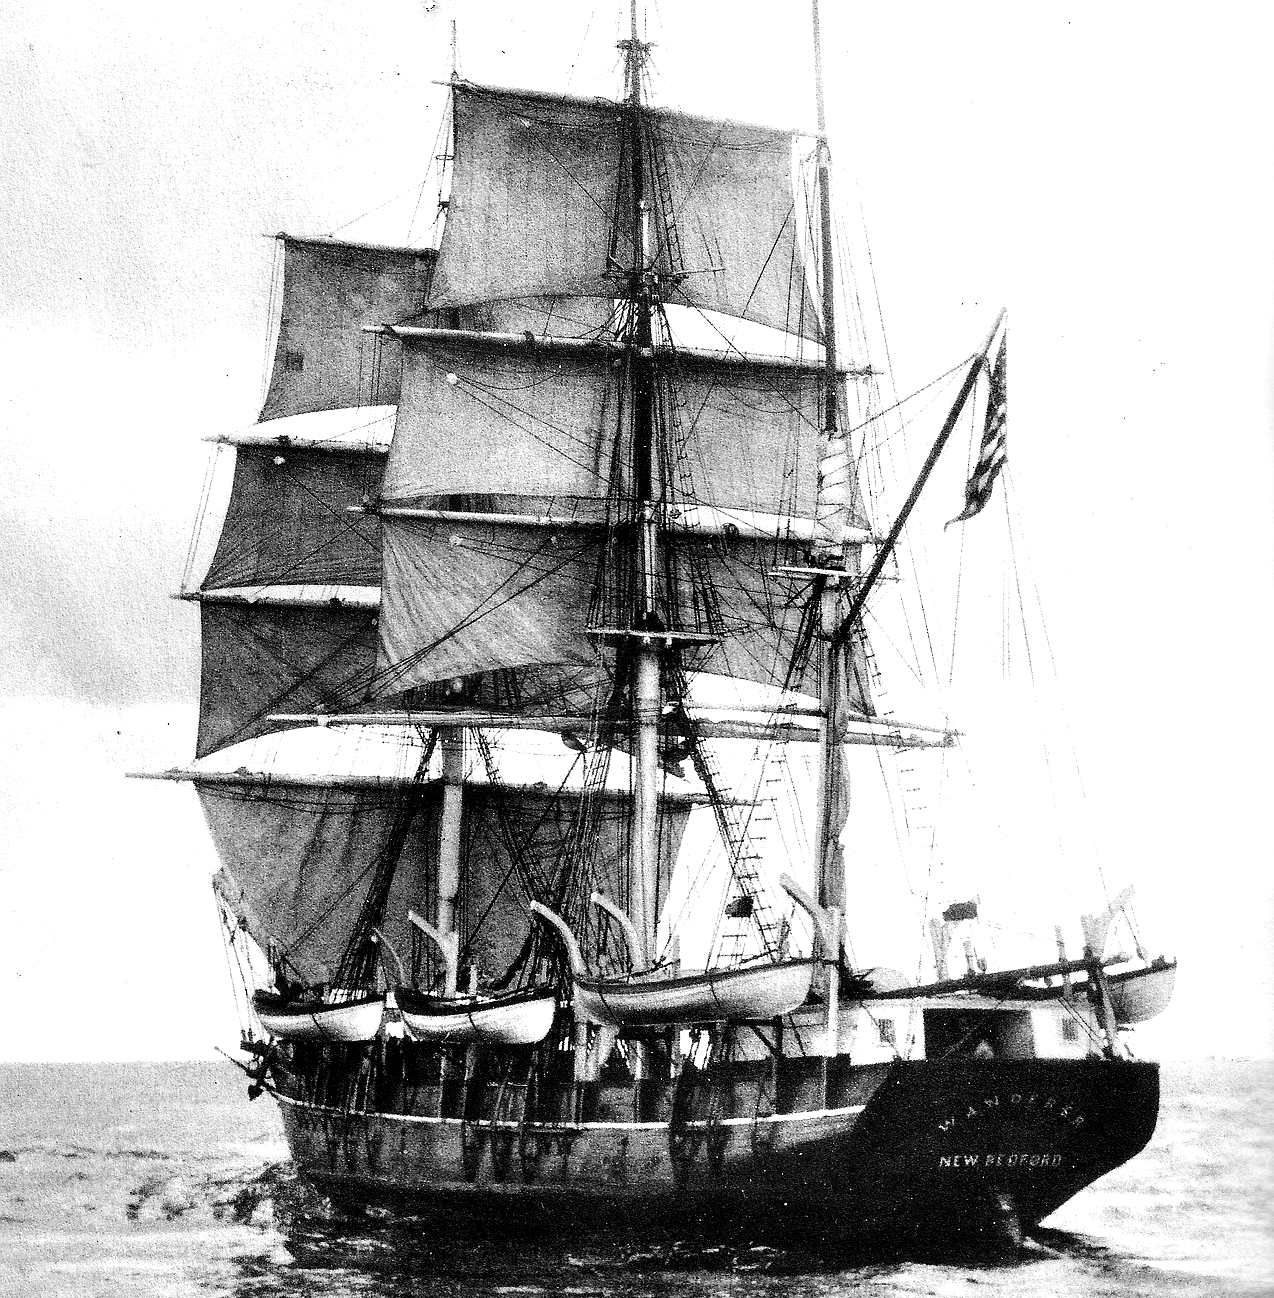 The Essex was a triple masted sailing ship fitted out for whaling